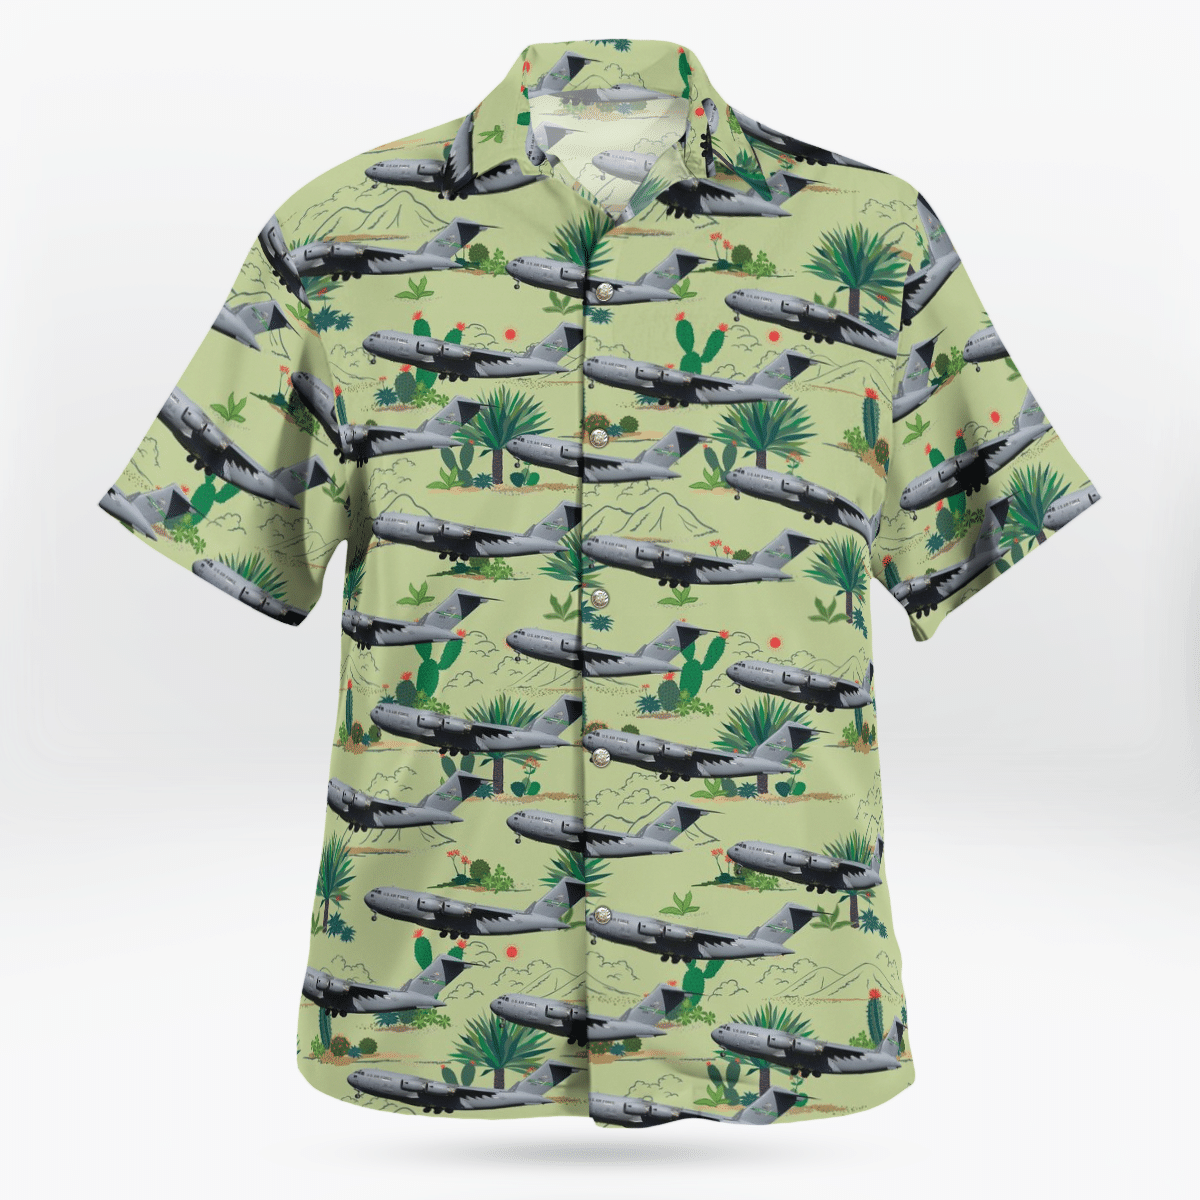 Hawaiian shirts never go out of style